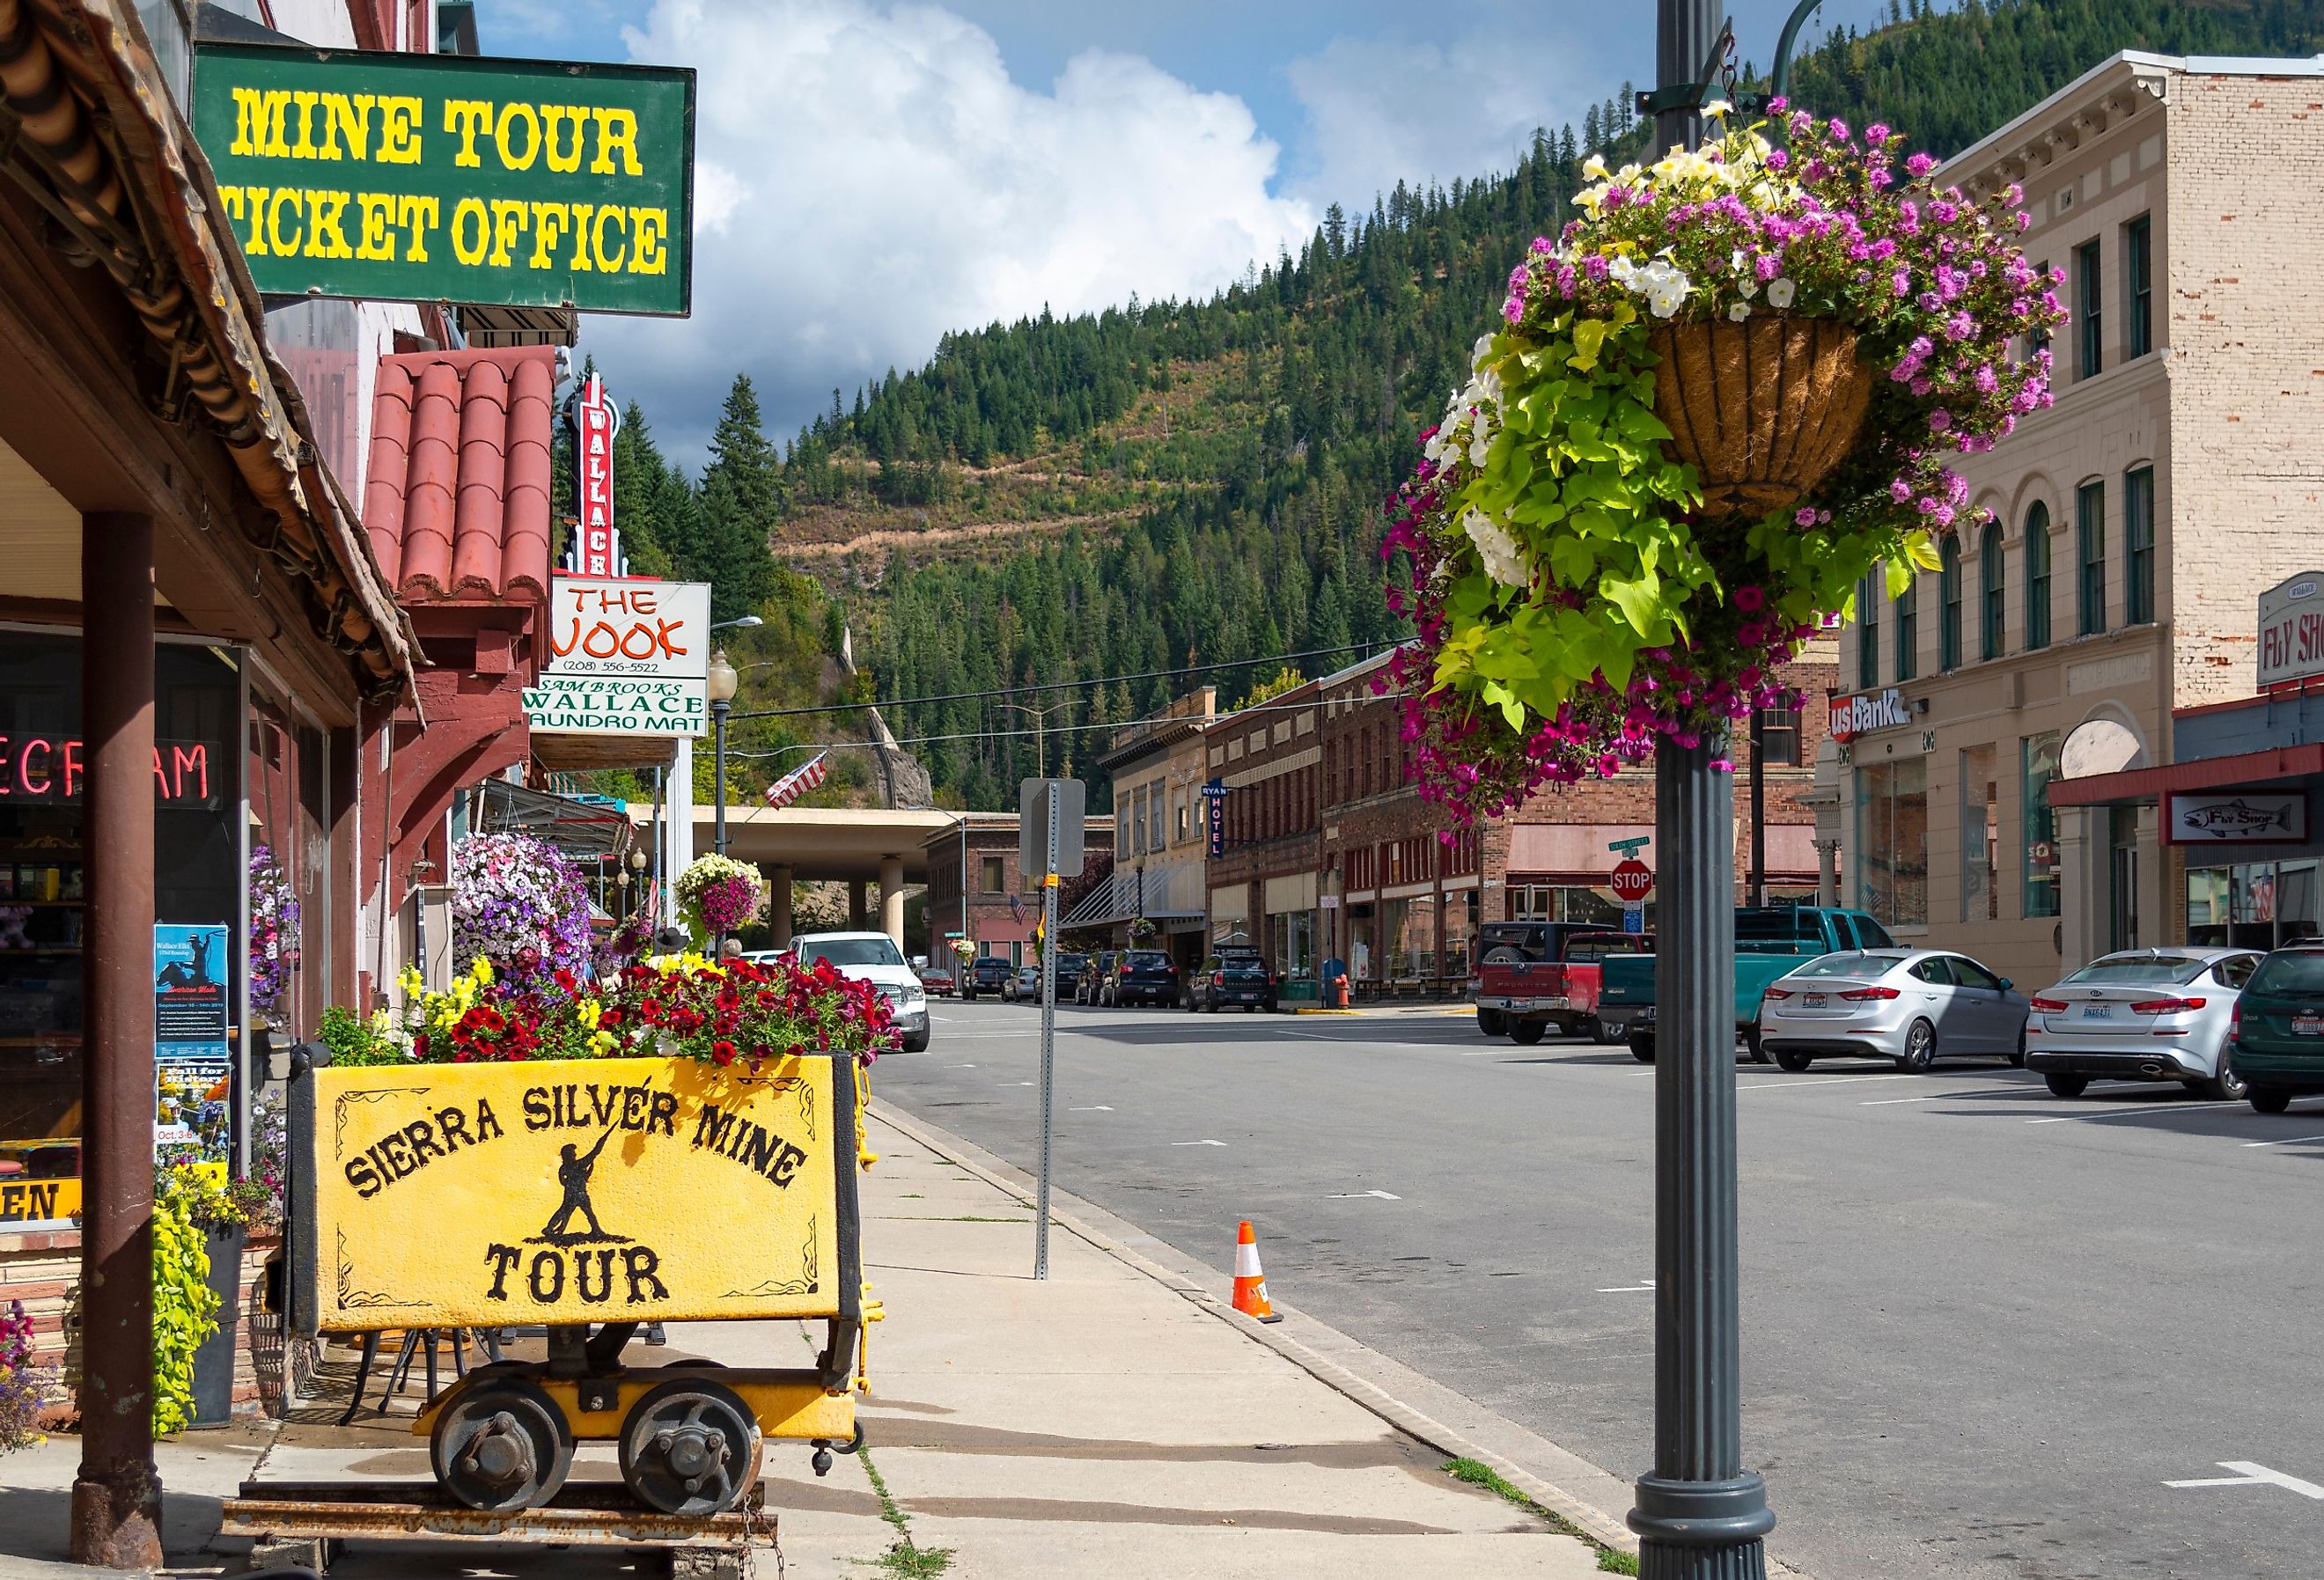 A picturesque main street in the historic mining town of Wallace, Idaho. Image credit Kirk Fisher via Shutterstock